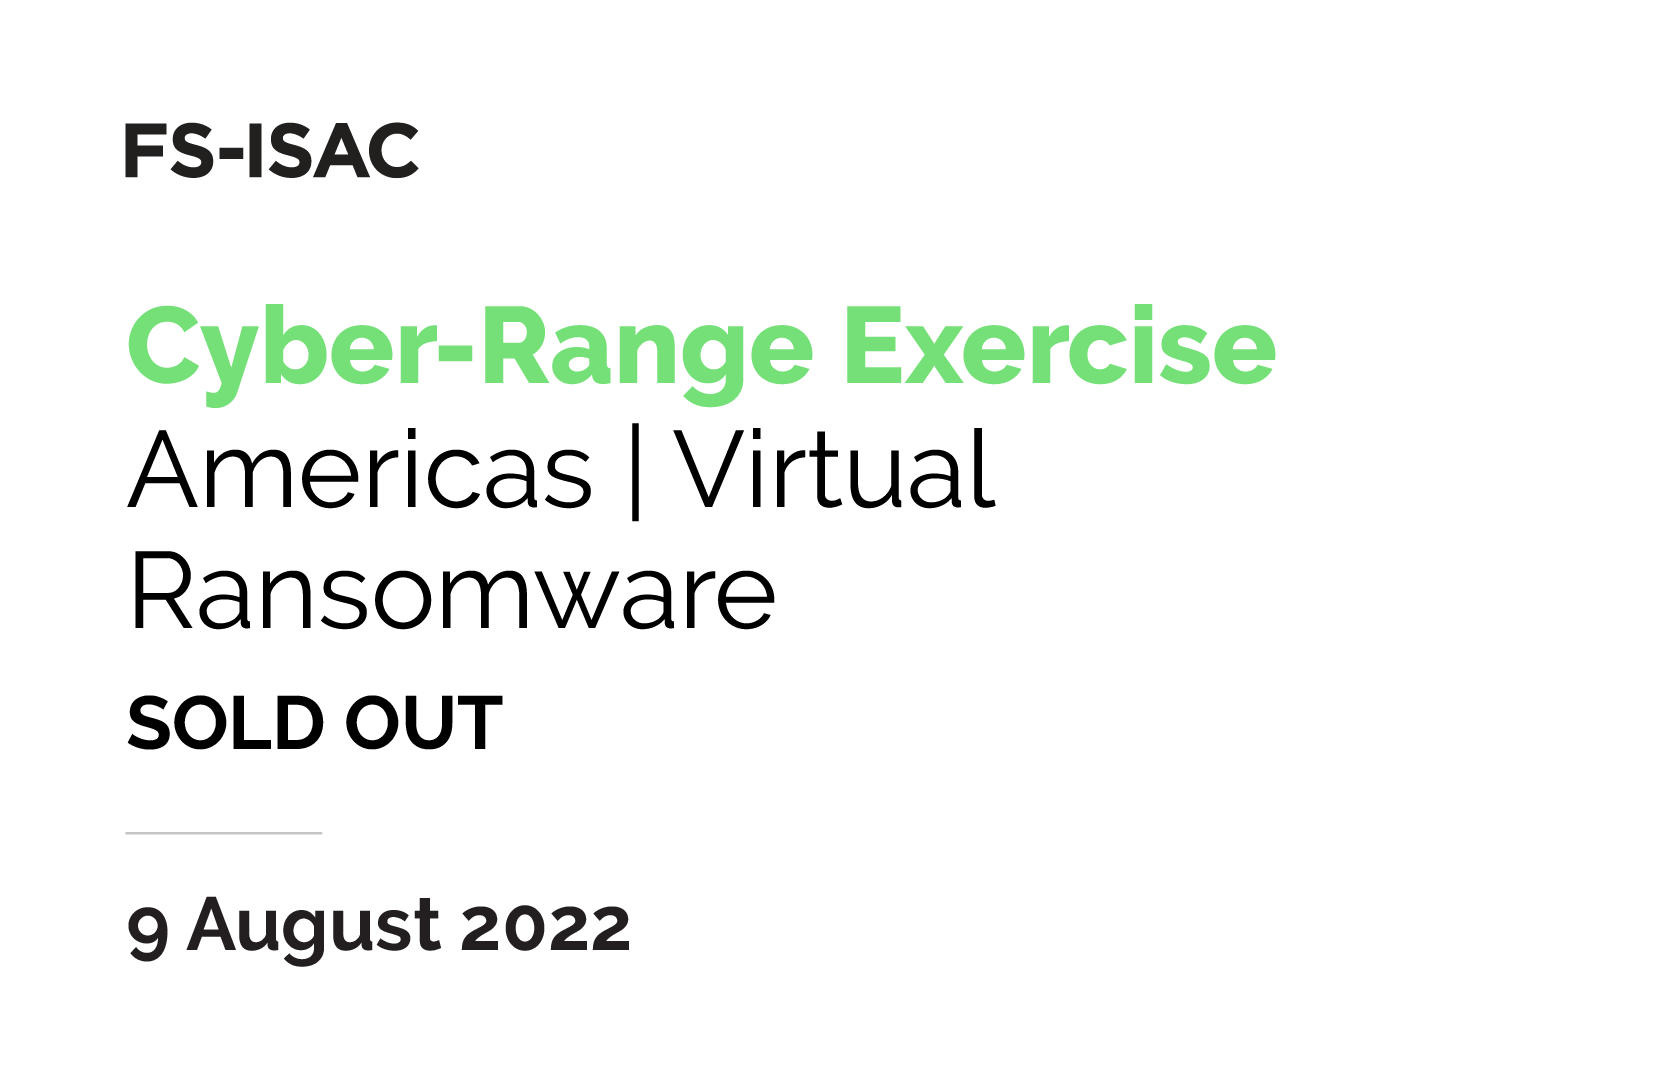 FS-ISAC Cyber Range Exercise | Ransomware Americas | August 2022